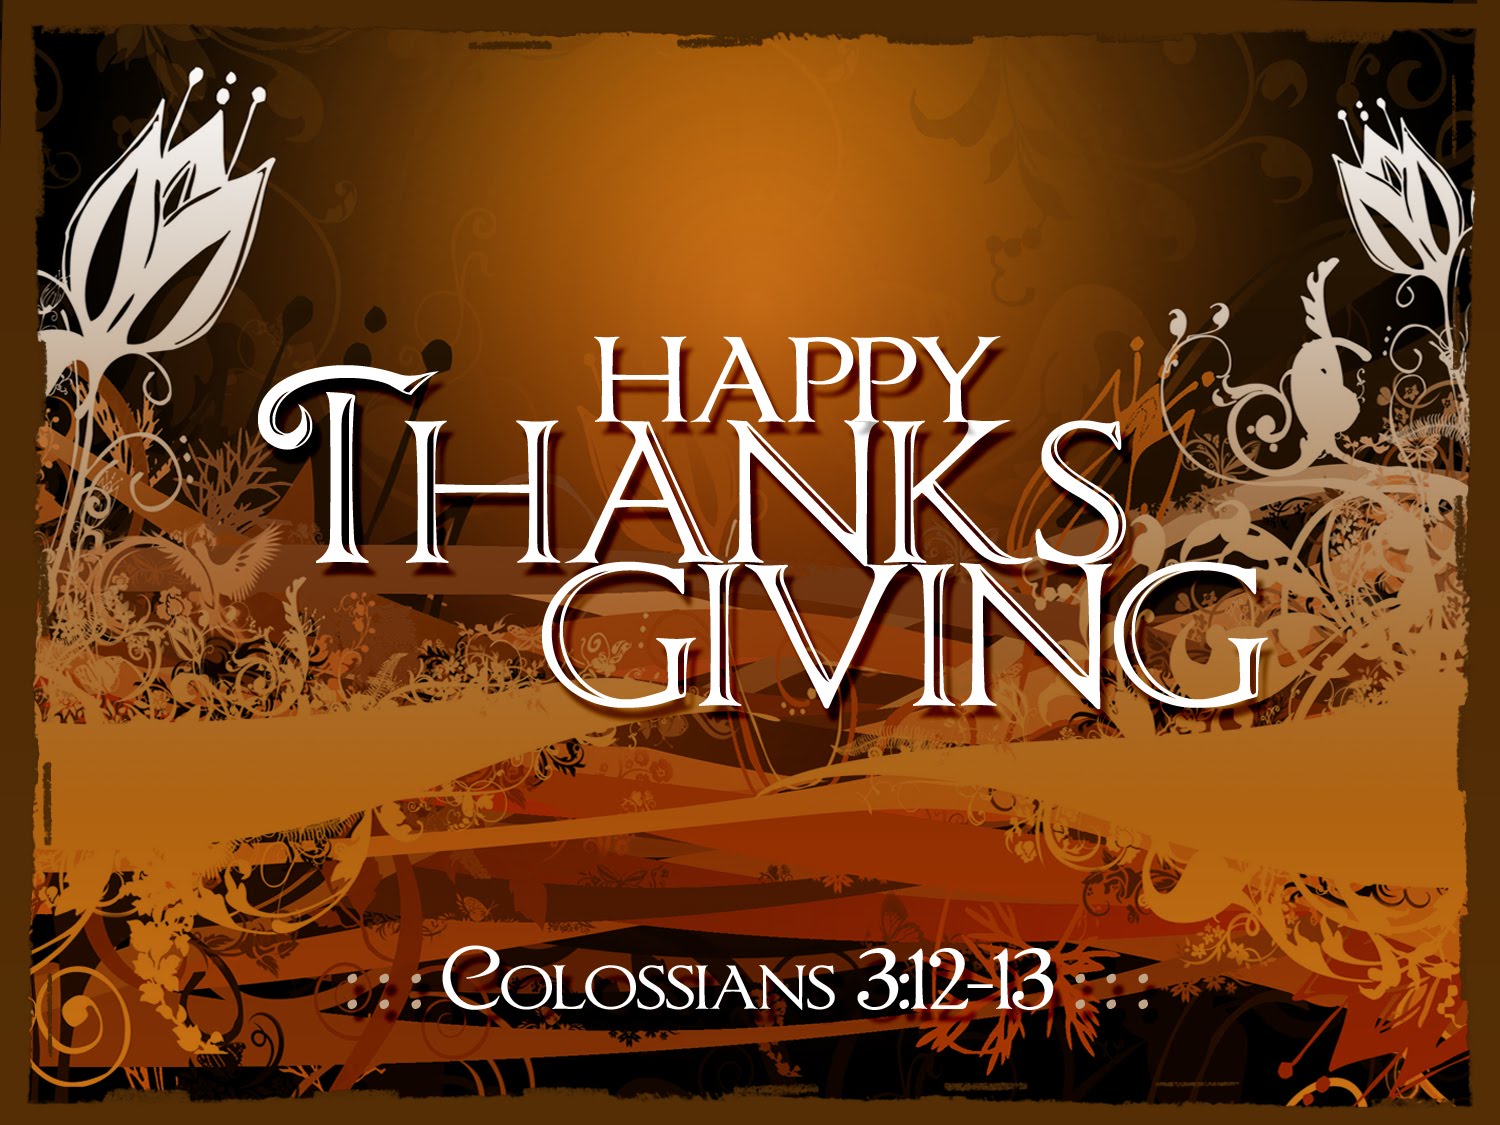 free christian clip art for thanksgiving - photo #50